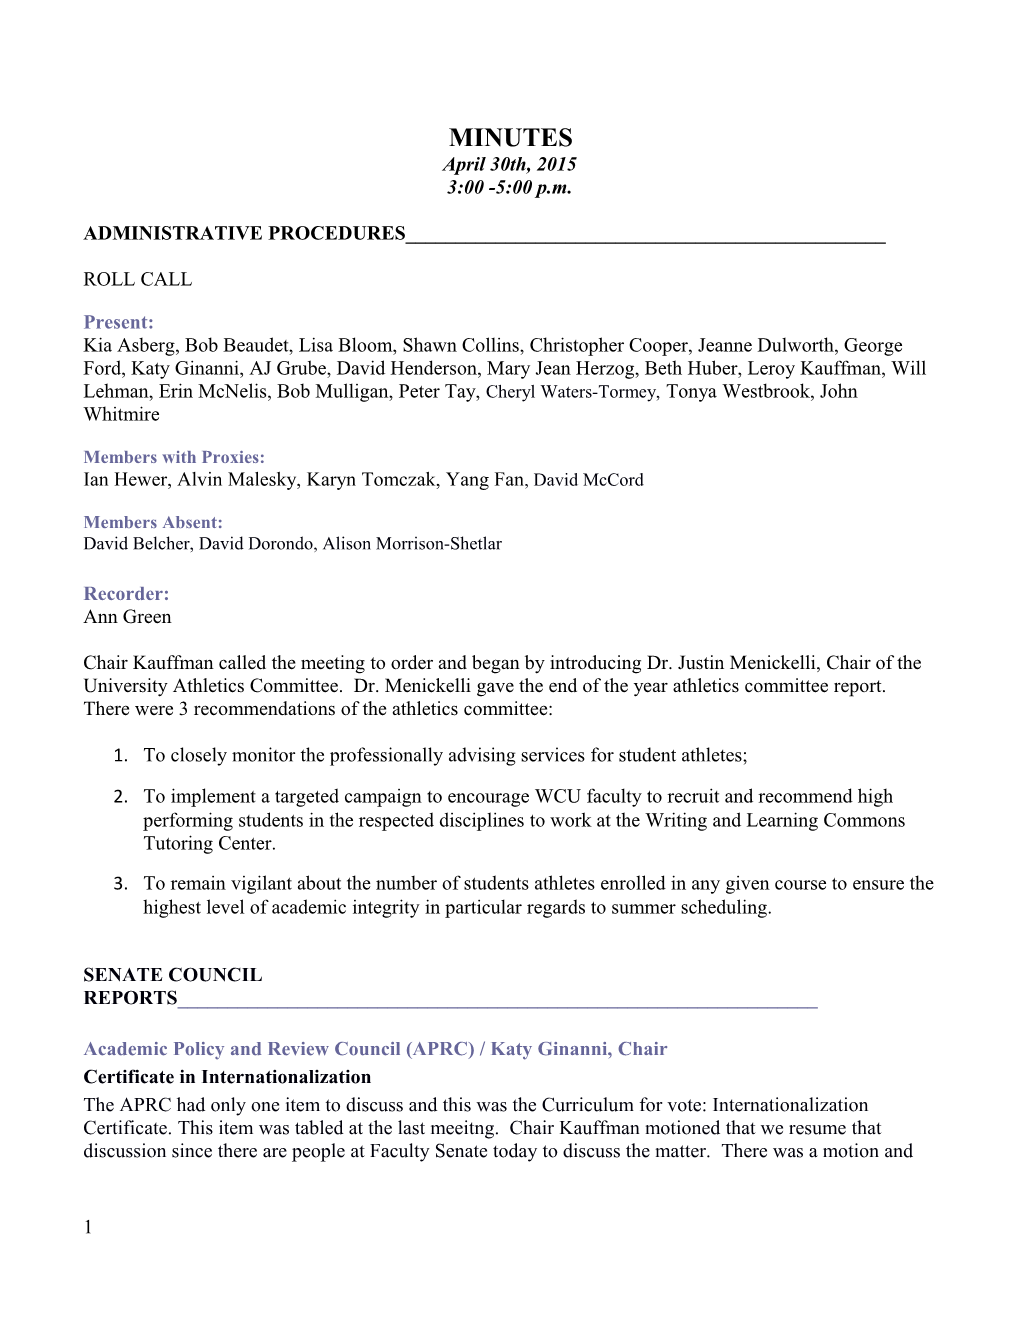 Faculty Senate Meeting Minutes April 30, 2015FOR APPROVAL